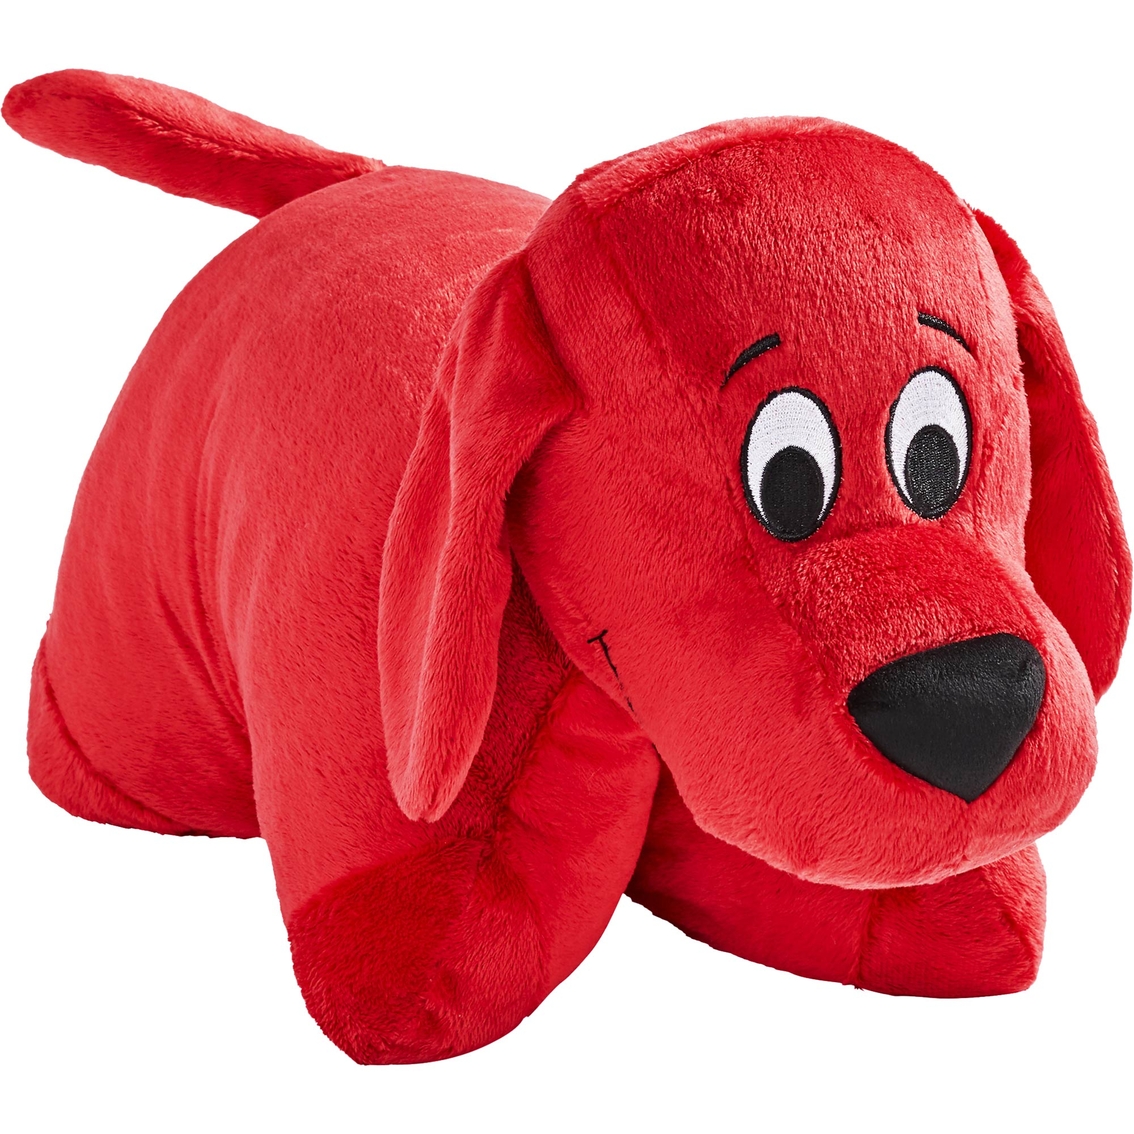 Pillow Pets Jumboz Clifford The Big Red Dog Stuffed Animal Plush Toy, Stuffed Animals & Toys, Baby & Toys